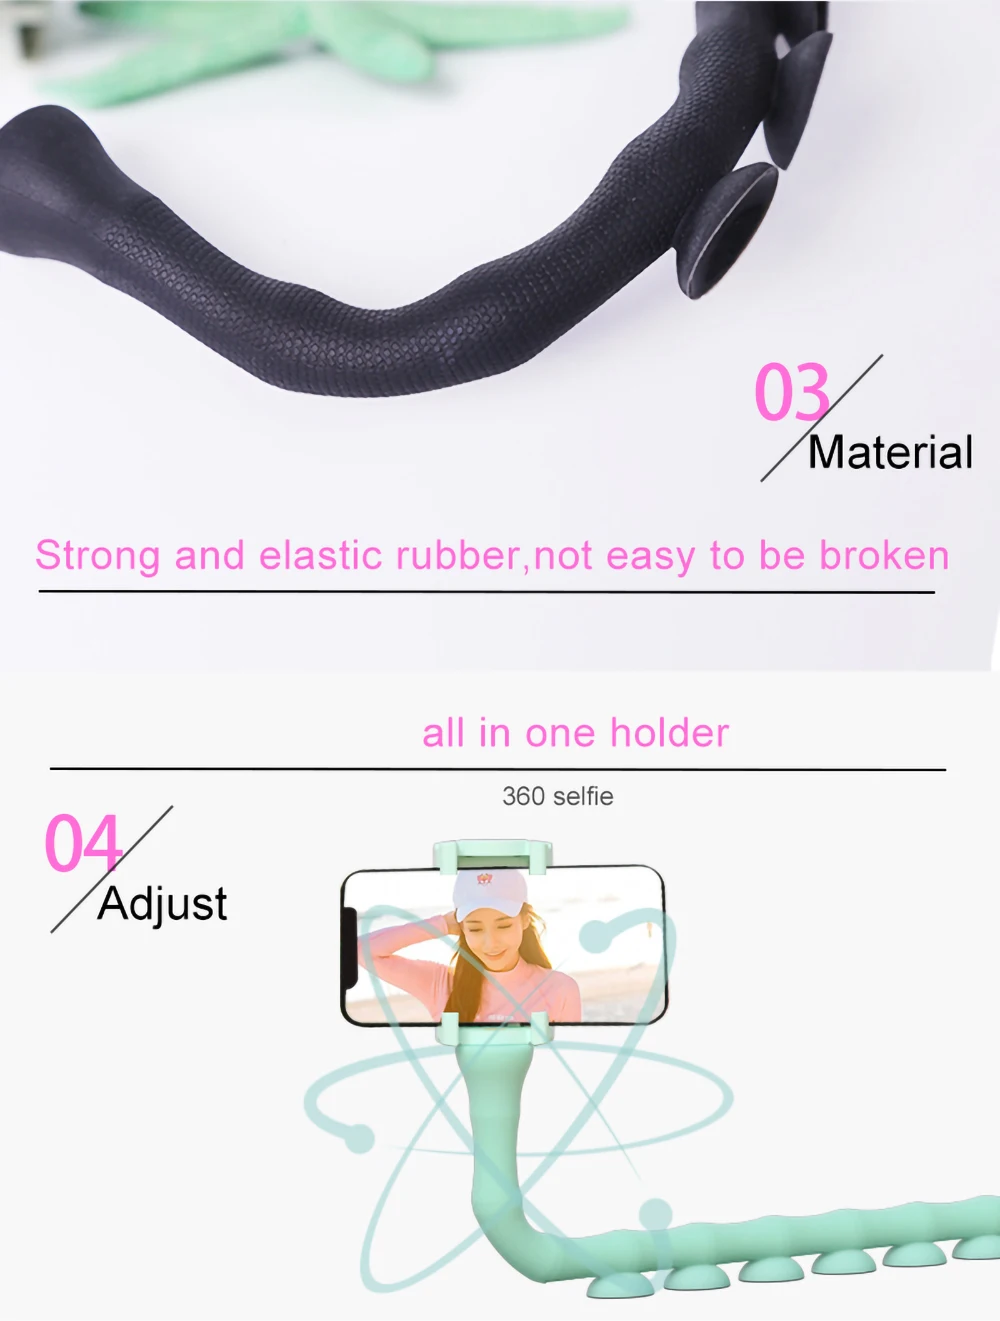 Cute worm Lazy Holder Lazy 360 Degree RotationPhone Supporter For Mobile Phone magnetic phone holder